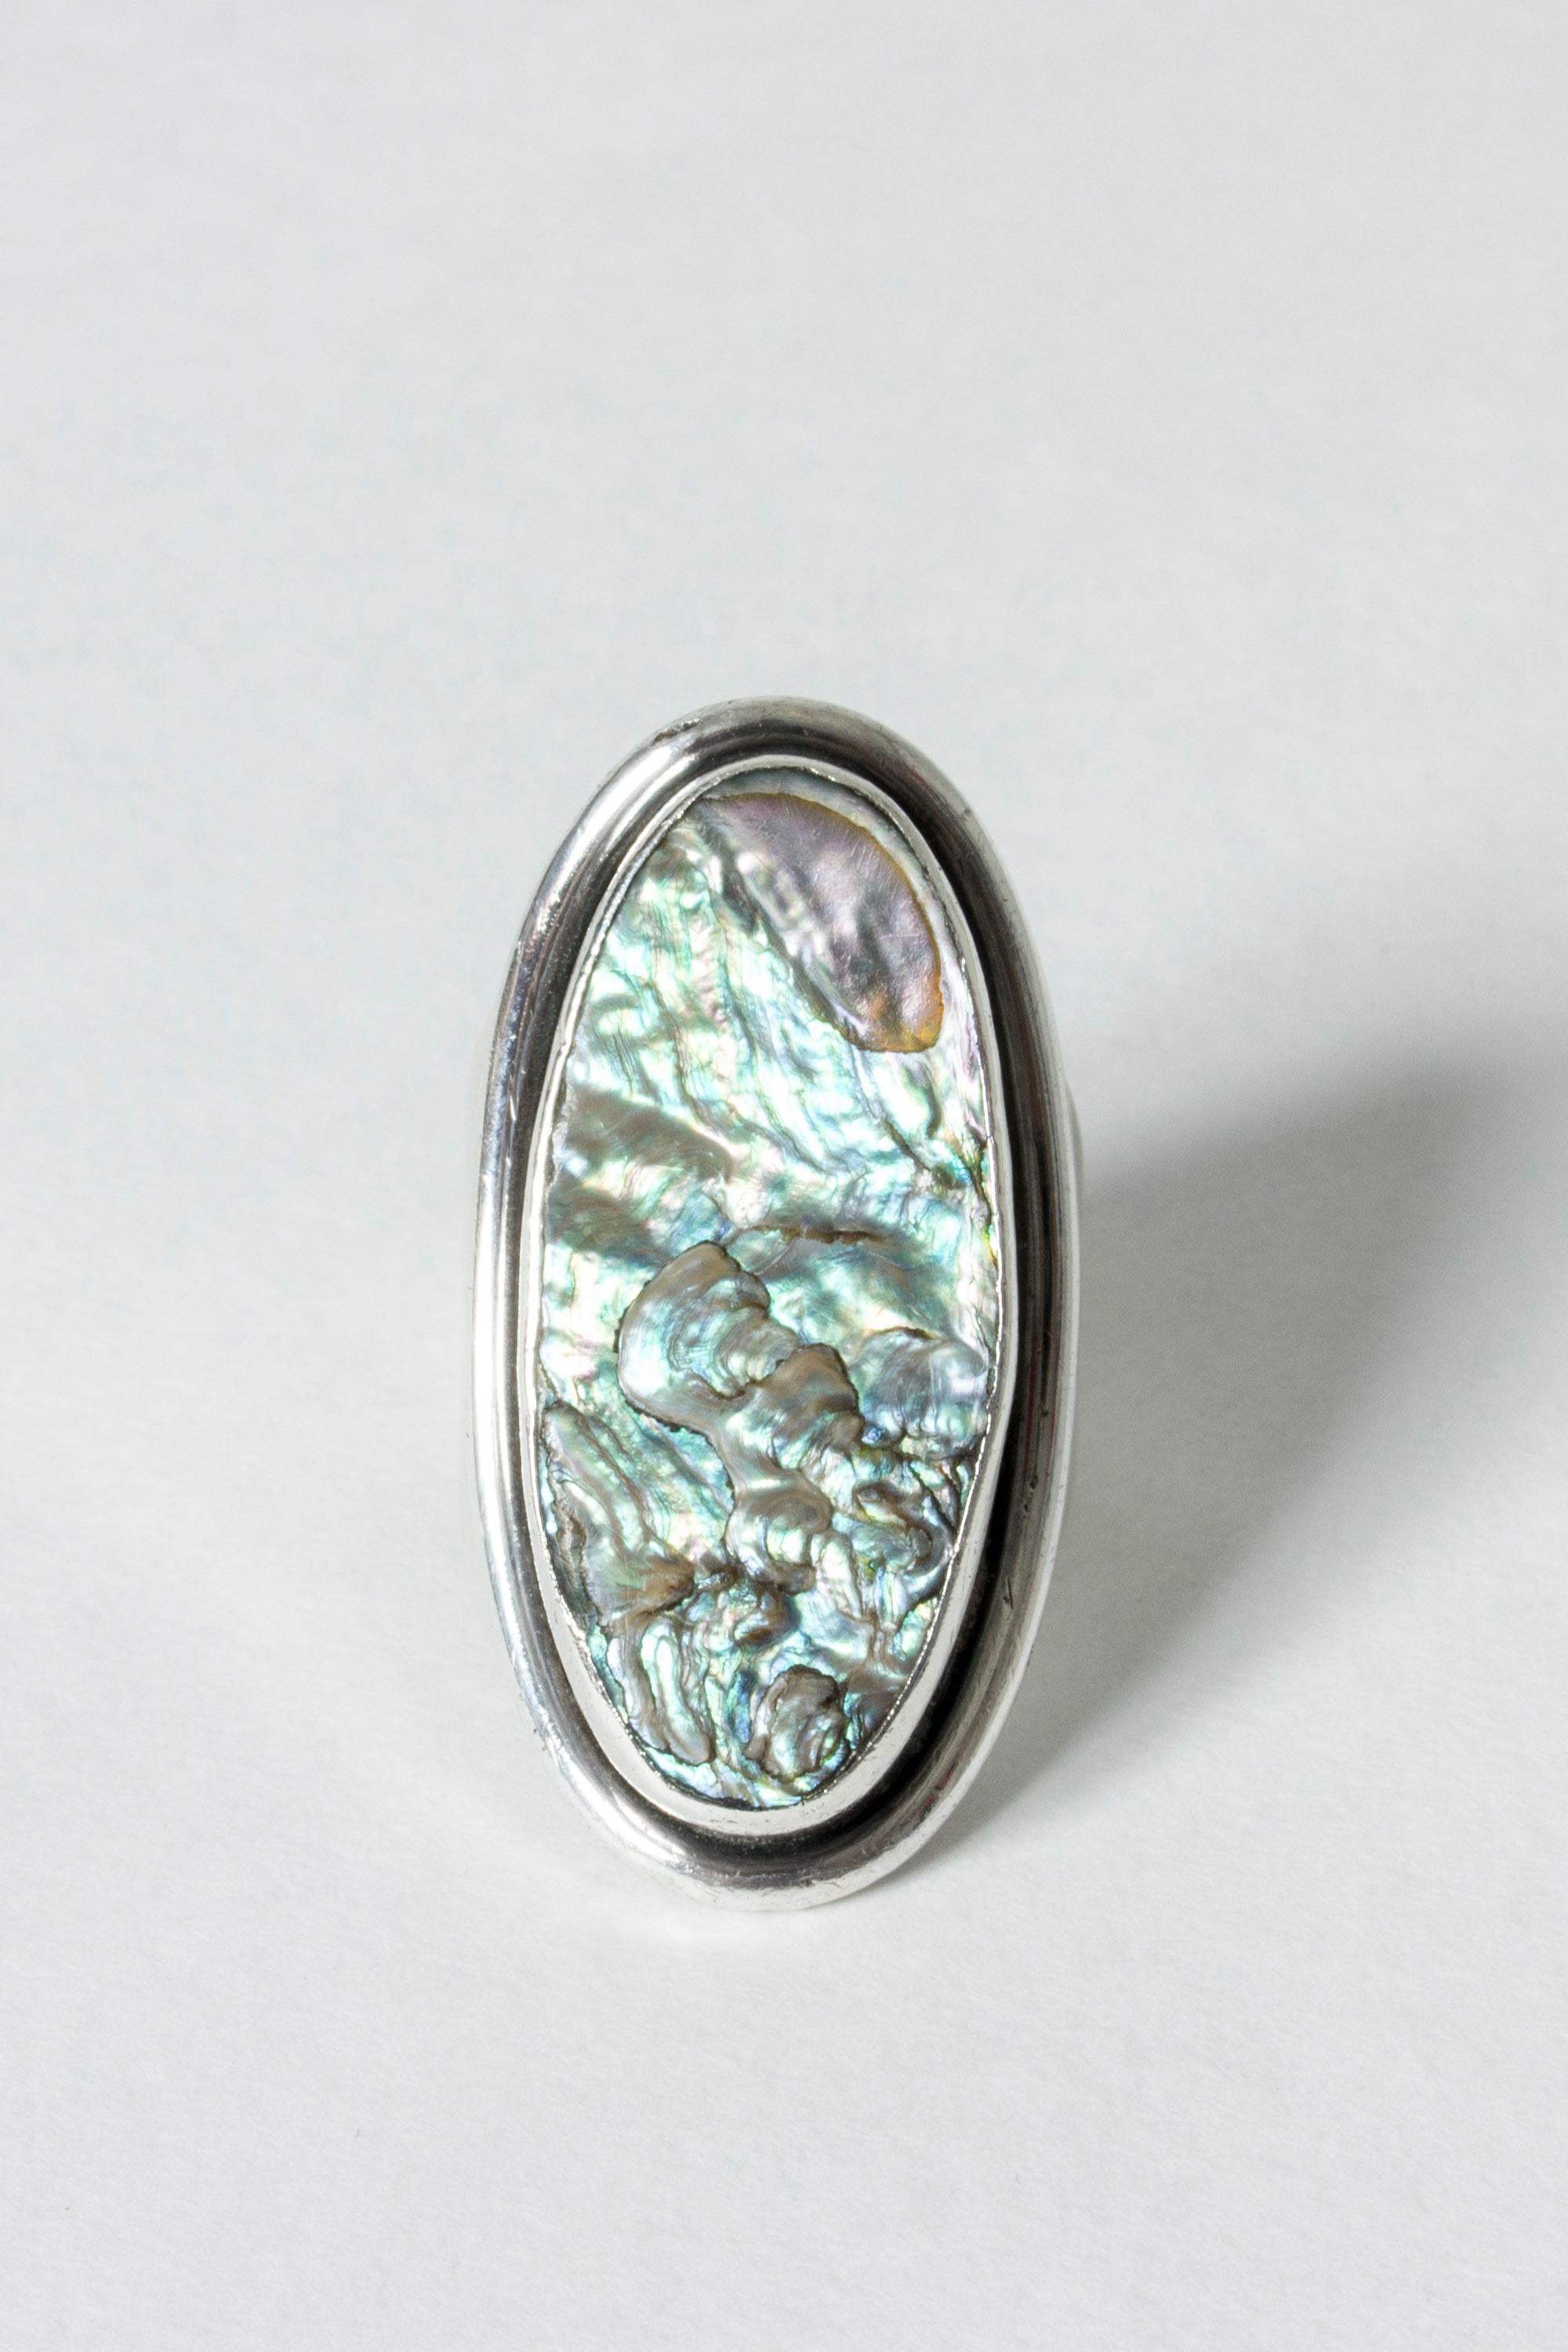 Striking silver ring by Carl Ove Frydensberg, with a large, elongated oval with mother of pearl. Beautiful combination of materials, dreamy shine and movement in the mother of pearl.